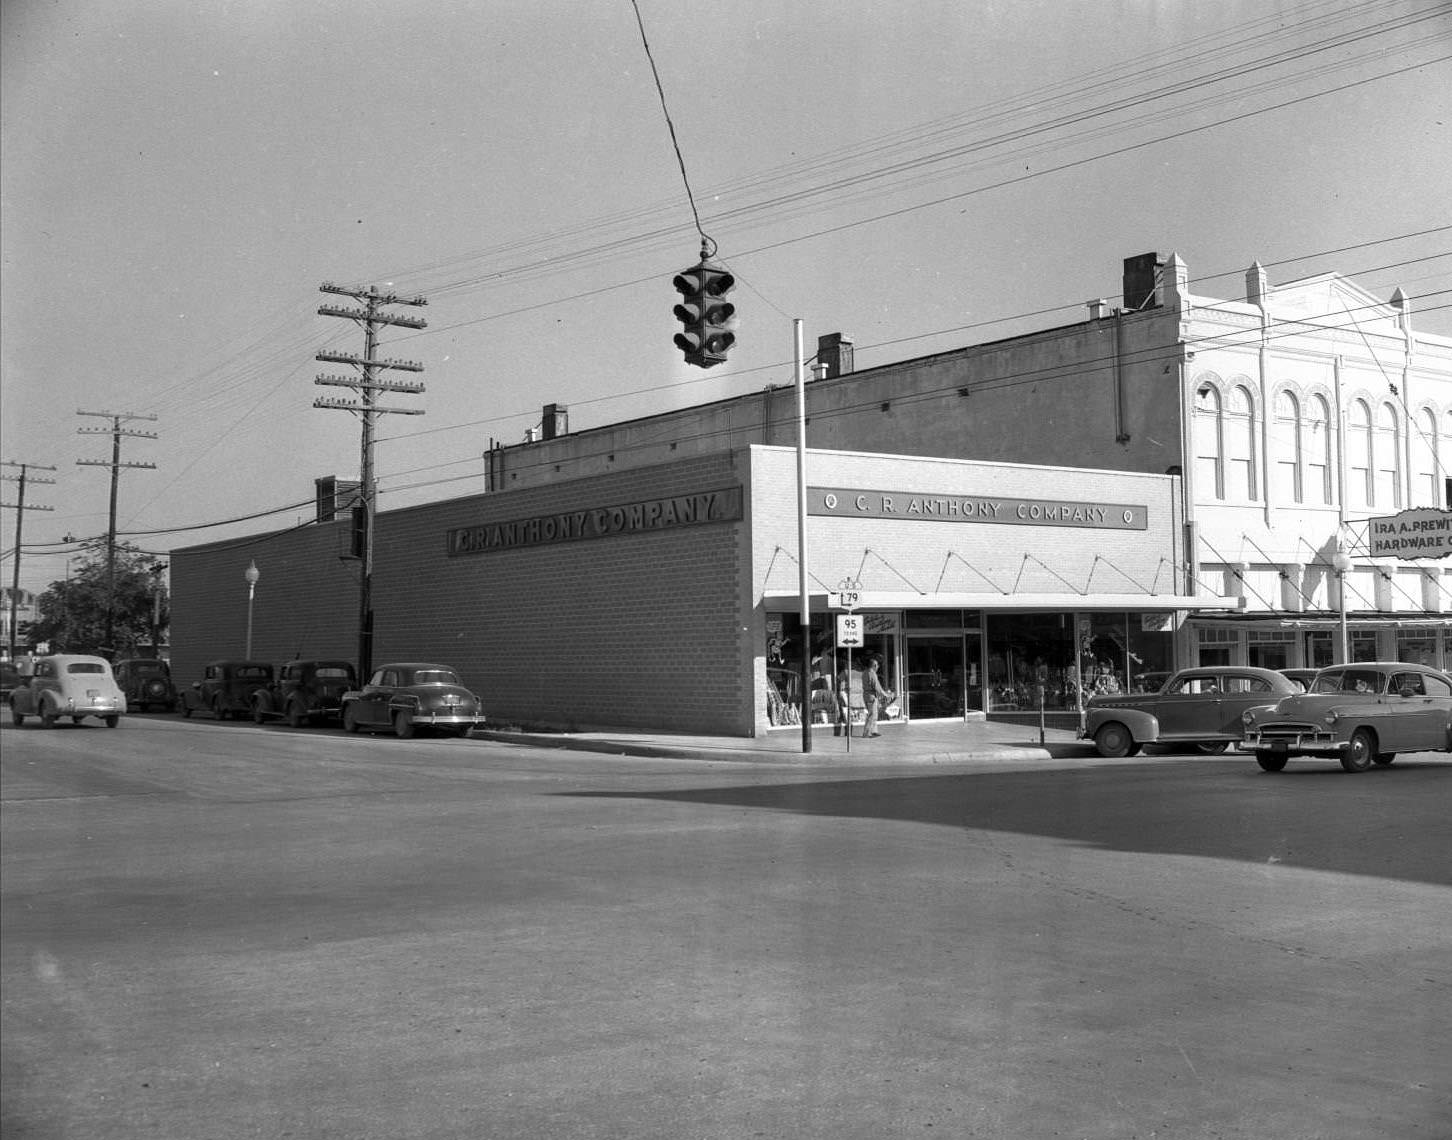 C.R. Anthony Co. and Ira A. Prewitt Hardware buildings on street corner, 1950